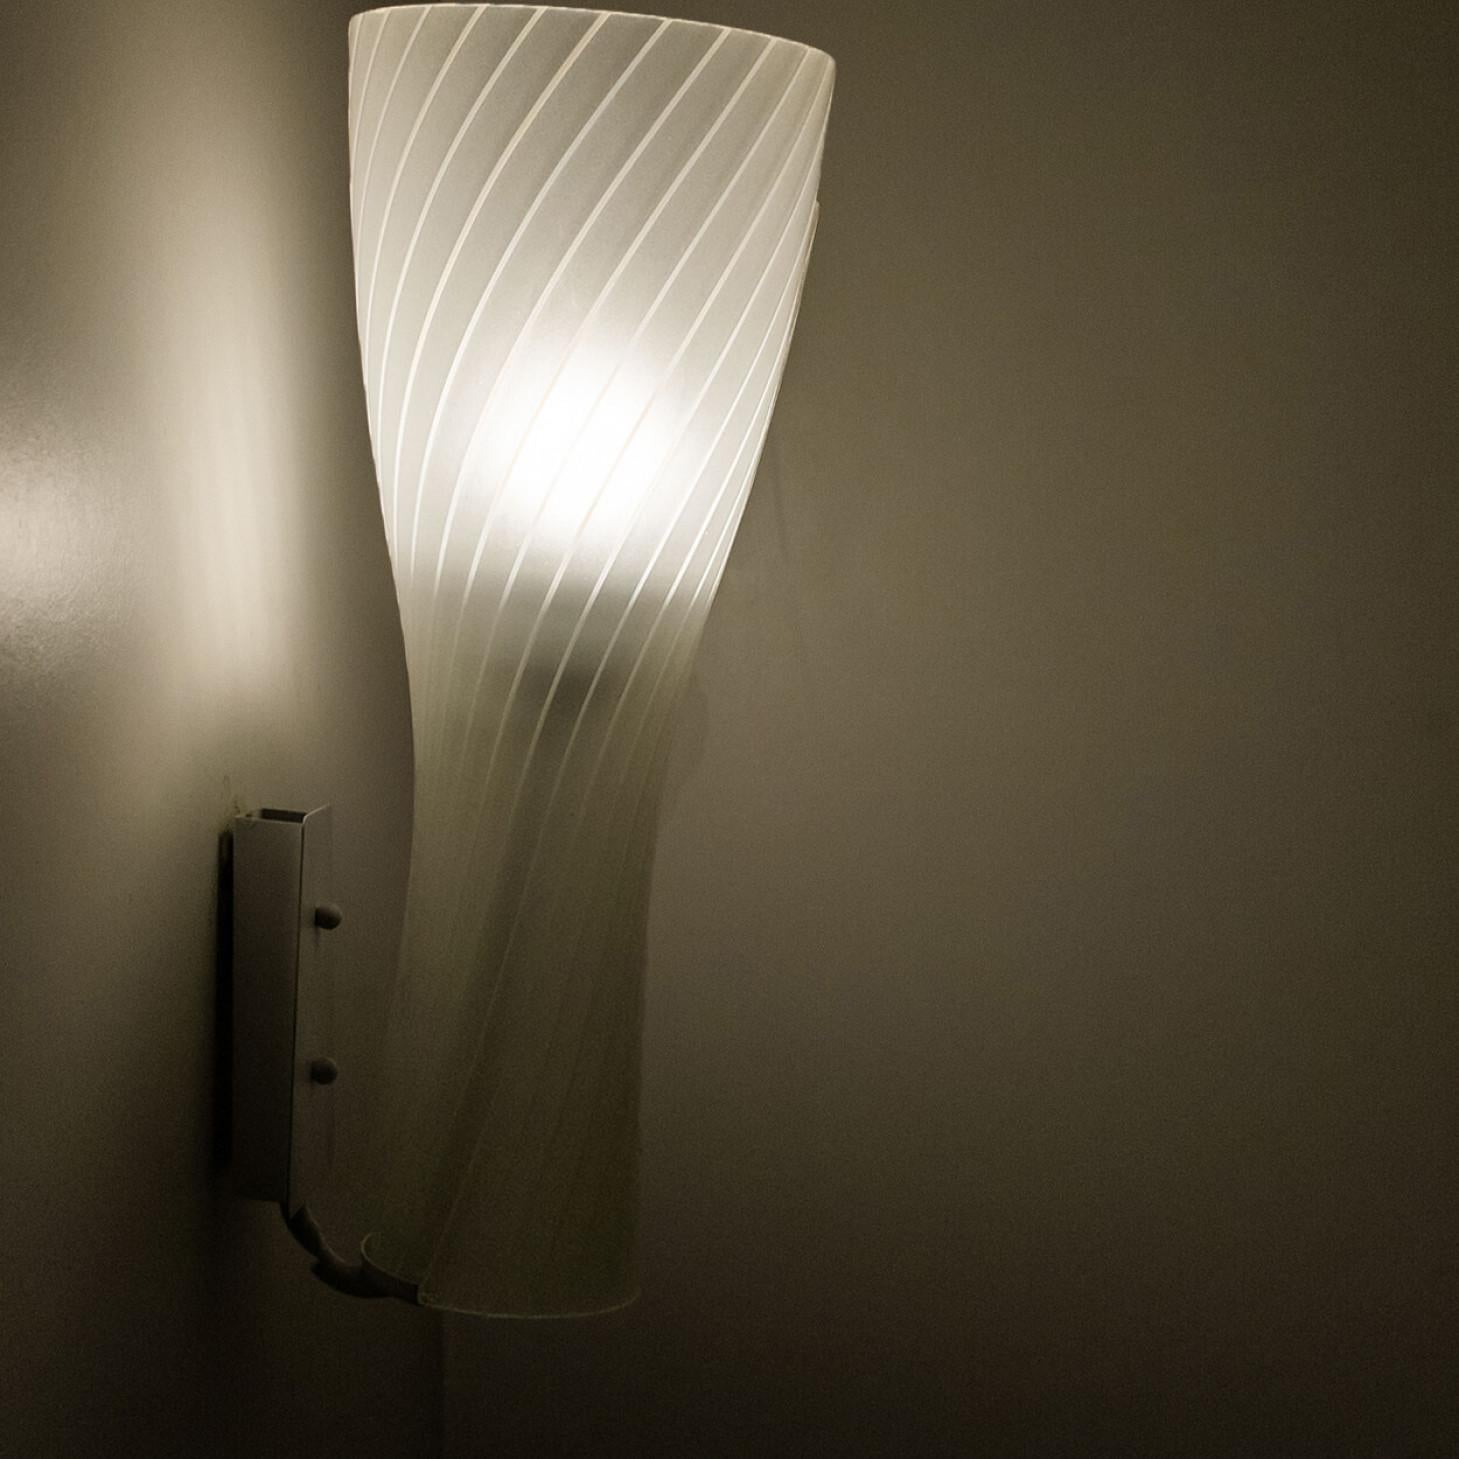 1 of 6 Striped Clear White Glass Wall Lights by Gangkofner for Peill, Germany For Sale 4